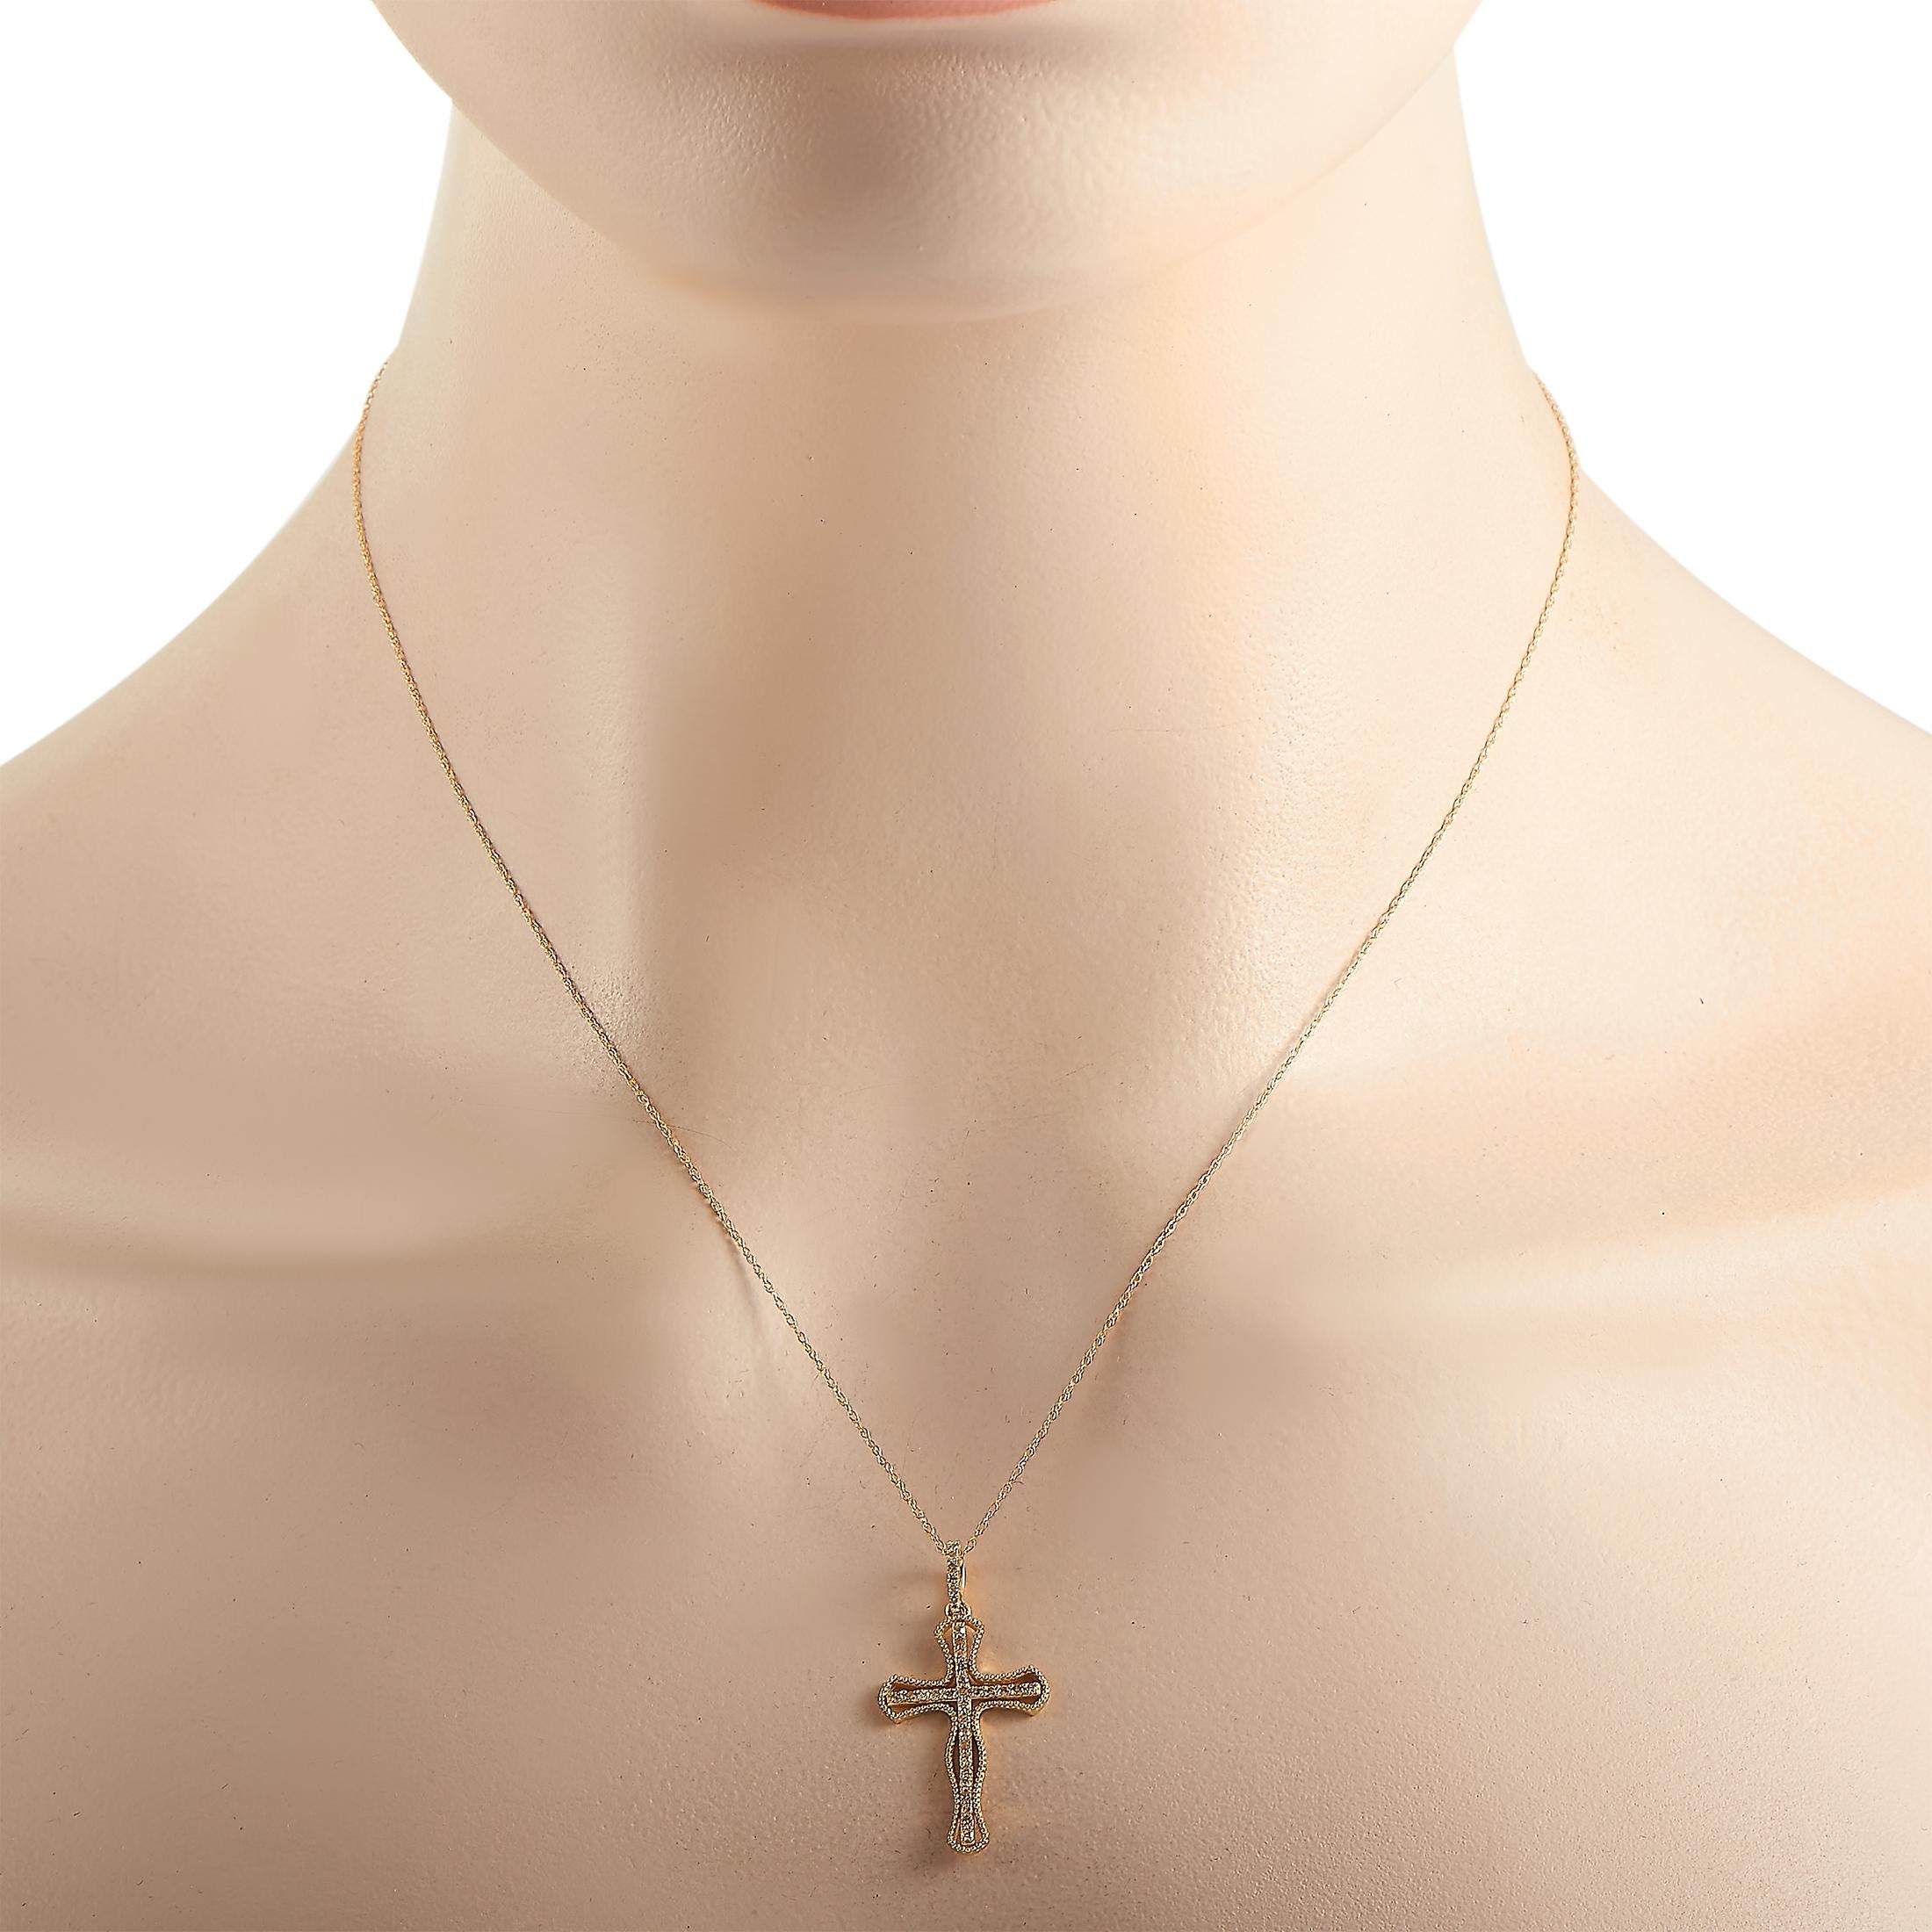 This LB Exclusive necklace is made of 14K yellow gold and weighs 1.7 grams. It is presented with an 18” chain and a cross pendant that measures 1.25” in length and 0.65” in width. The necklace is embellished with diamonds that amount to 0.20